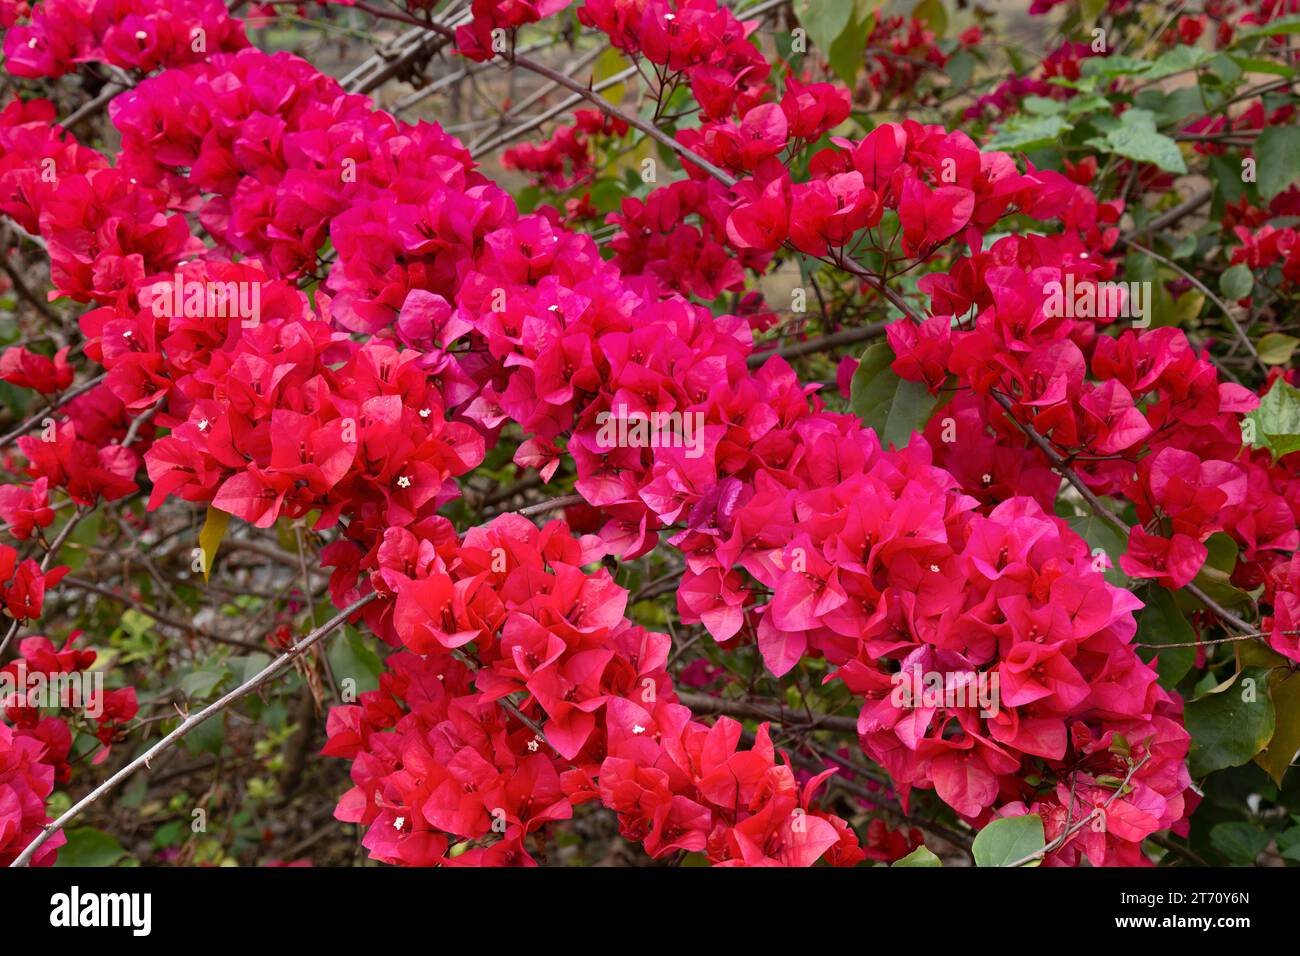 Pink Bougainvillea flowers in full bloom in the Himalayan area at Darjeeling, India Stock Photo